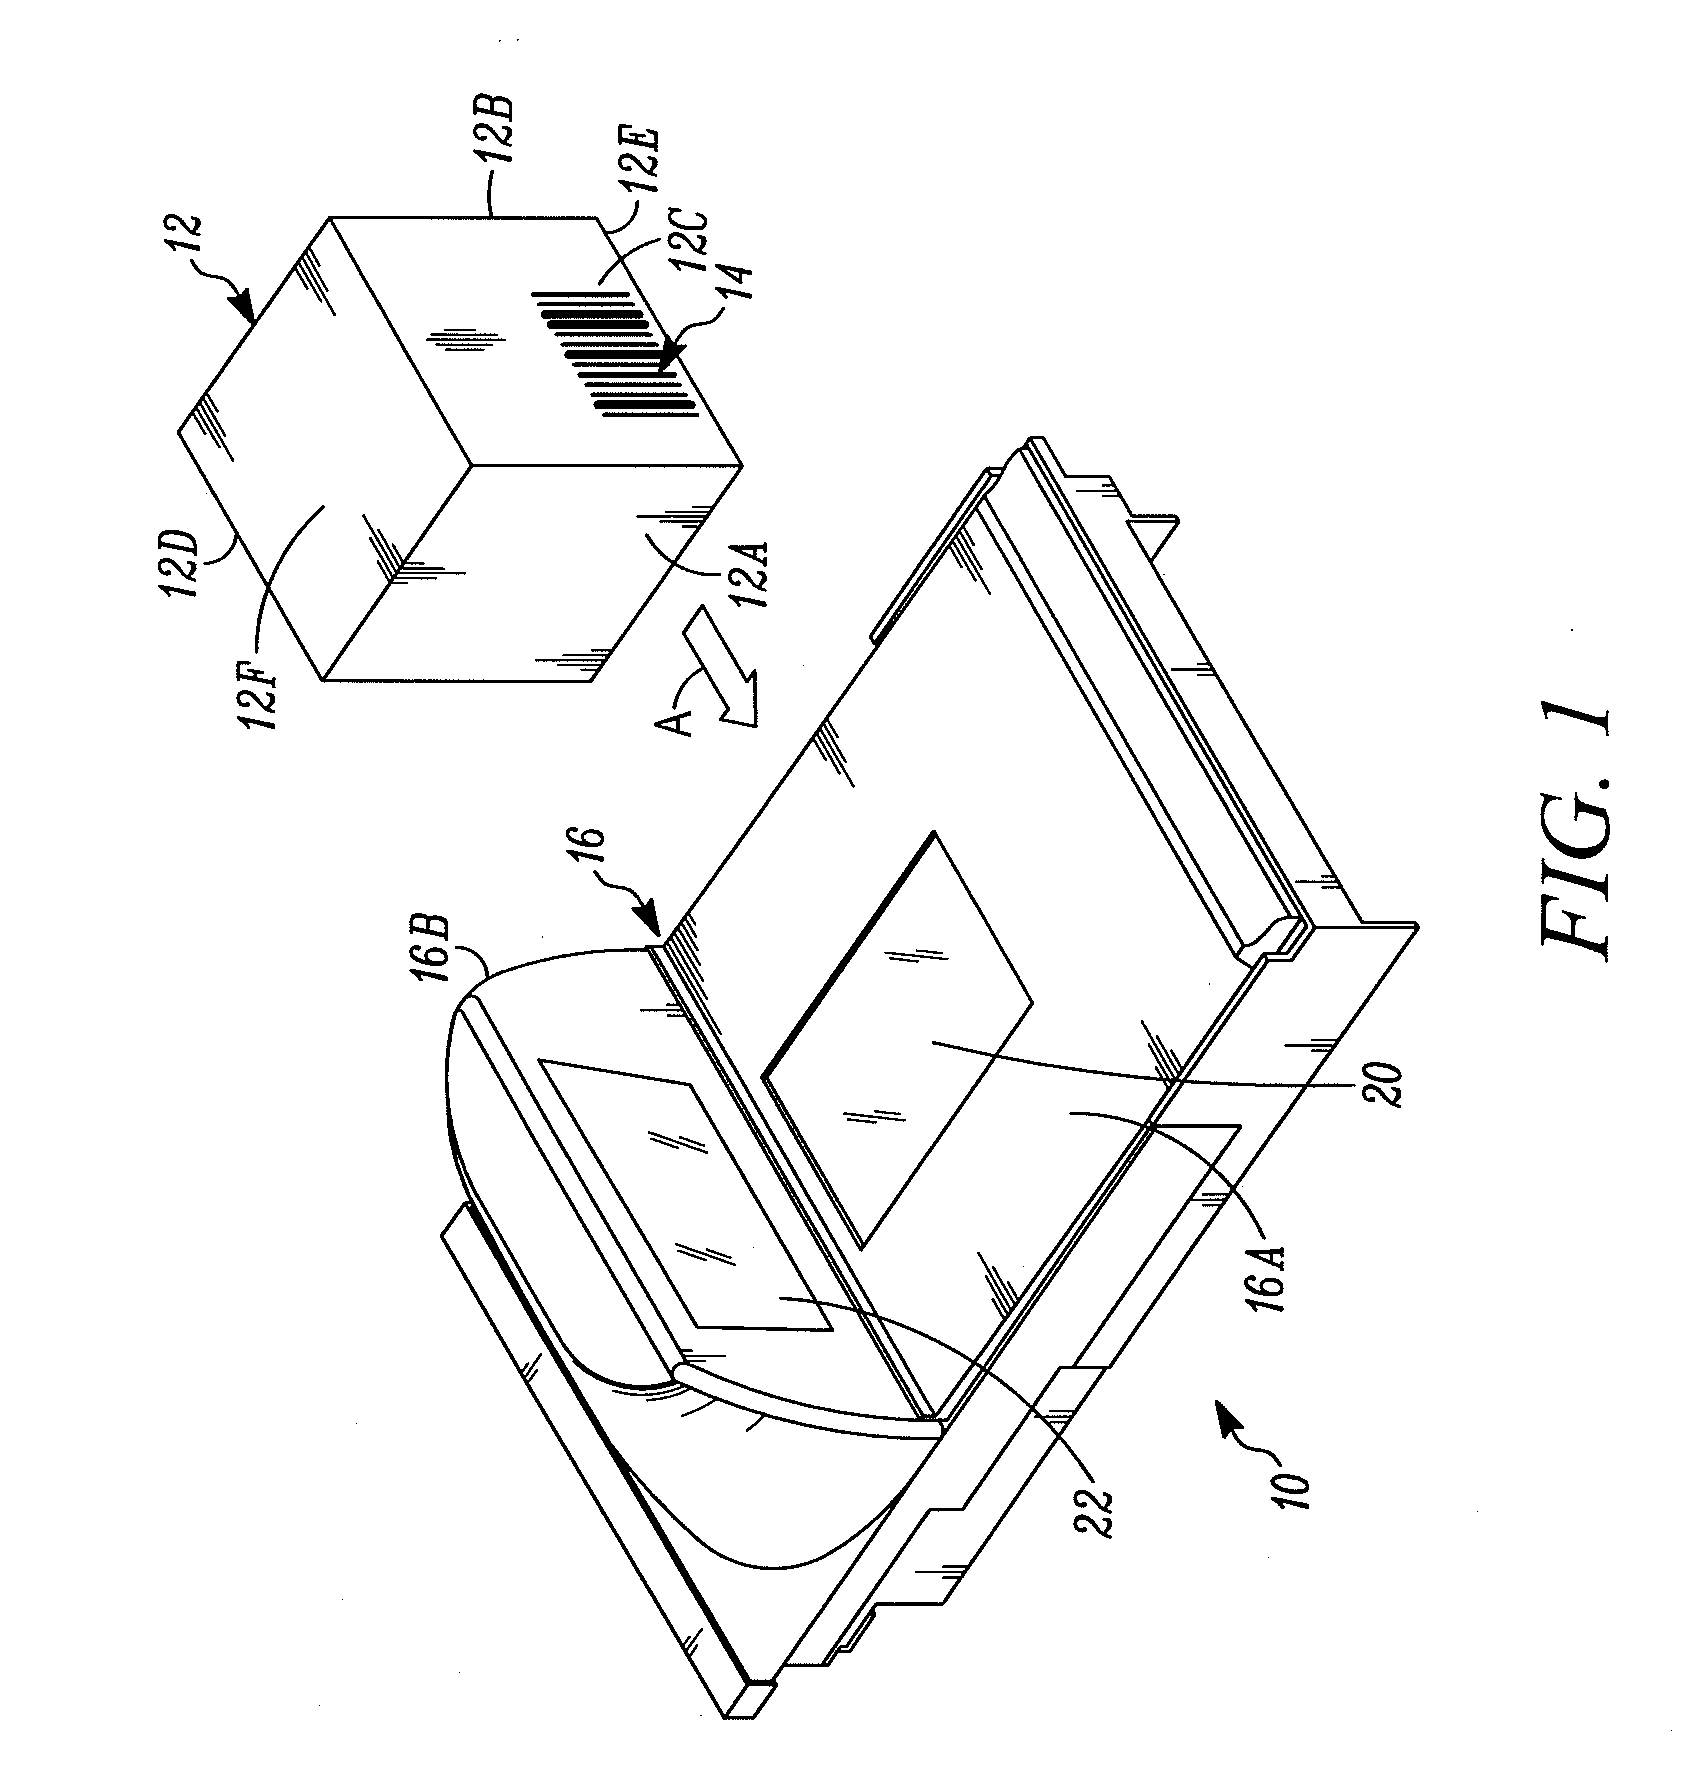 Point-of-transaction, dual window workstation for imaging indicia with a single imager and a stationary optical system